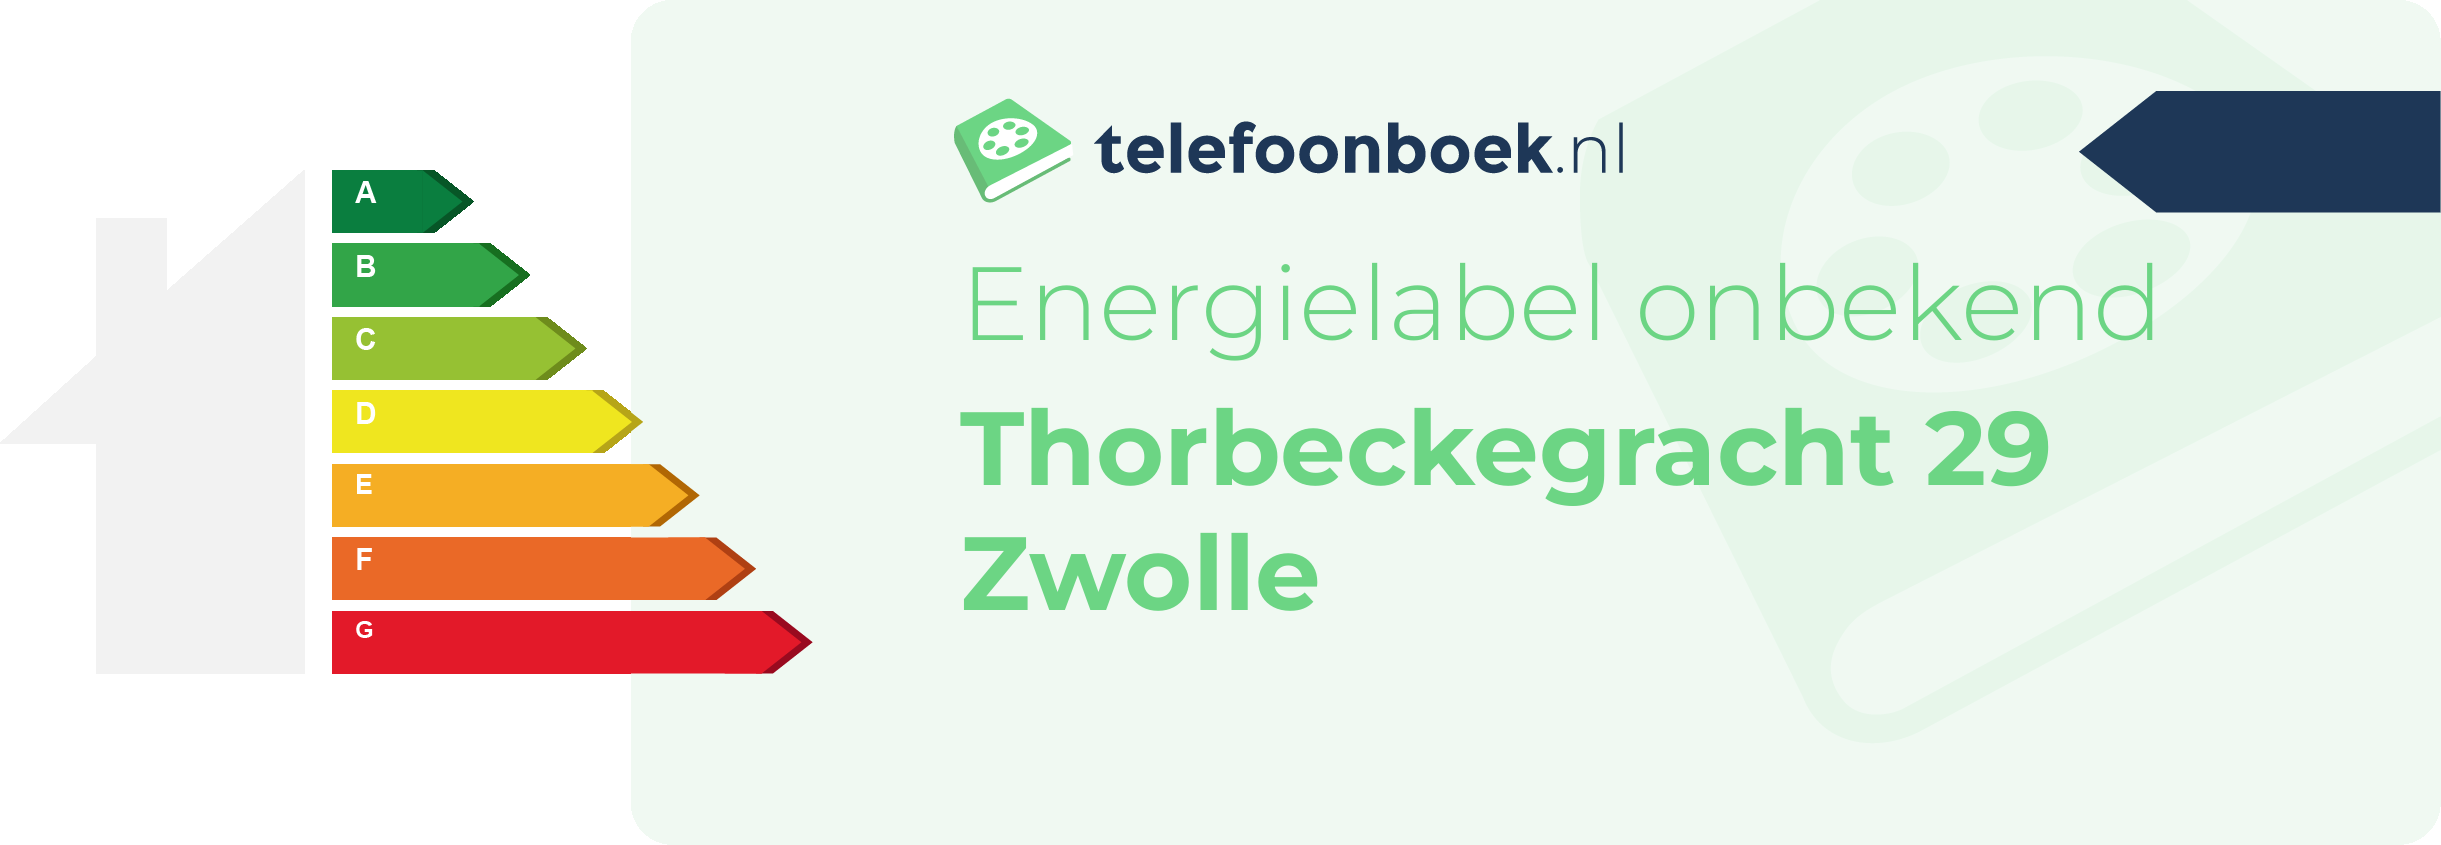 Energielabel Thorbeckegracht 29 Zwolle